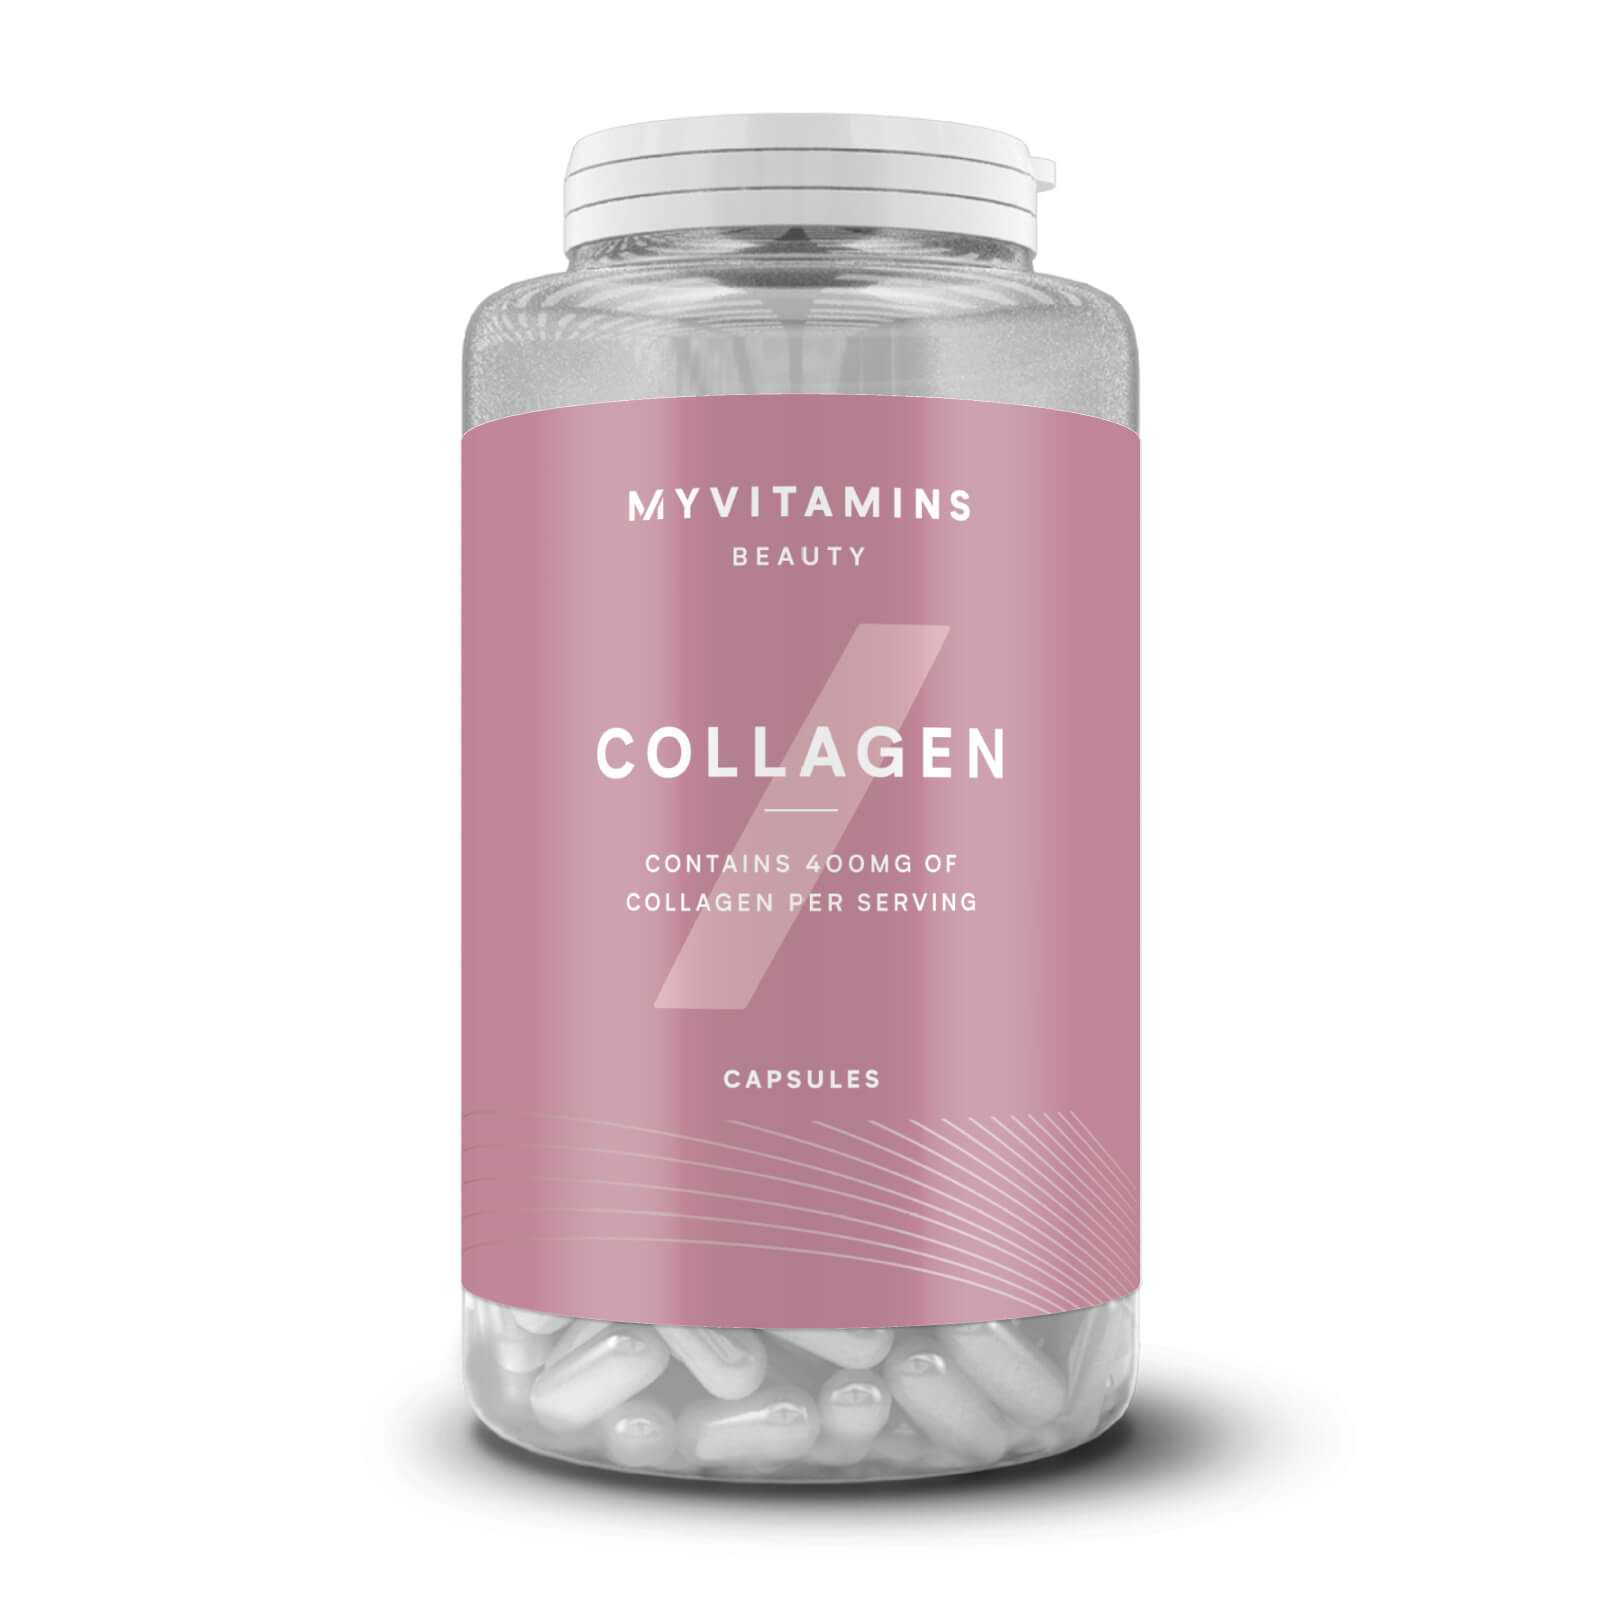 Myvitamins Collagen Capsules - 90Tablets